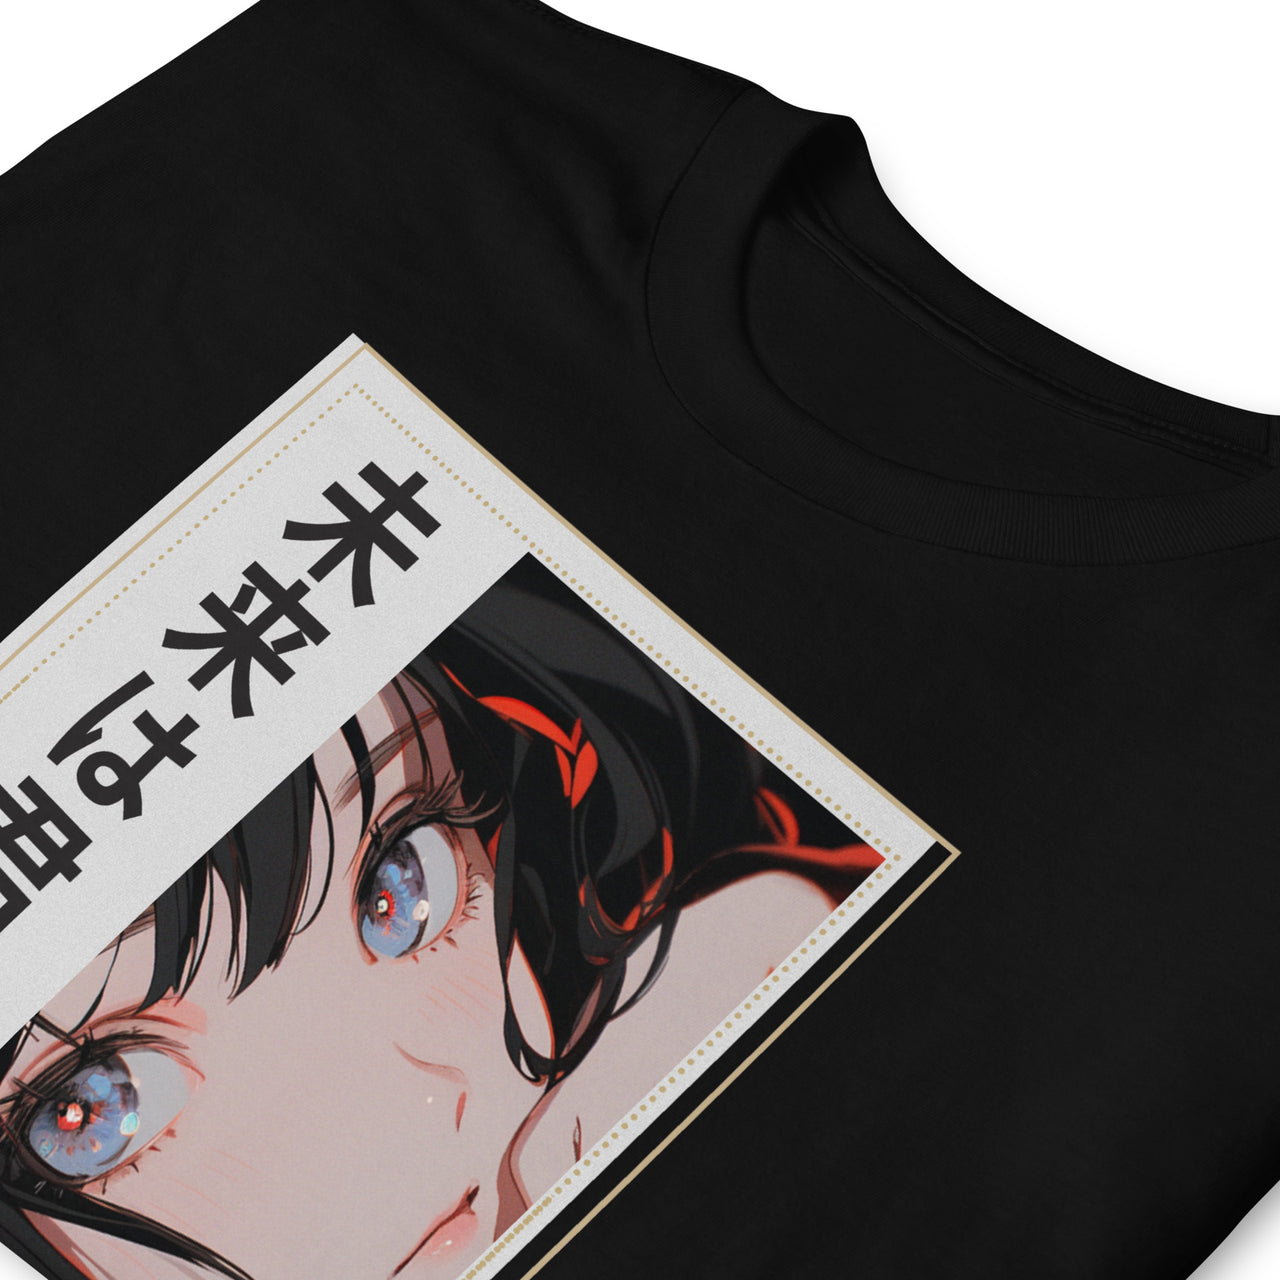 The Future is Yours Anime Girl Japanese T-Shirt